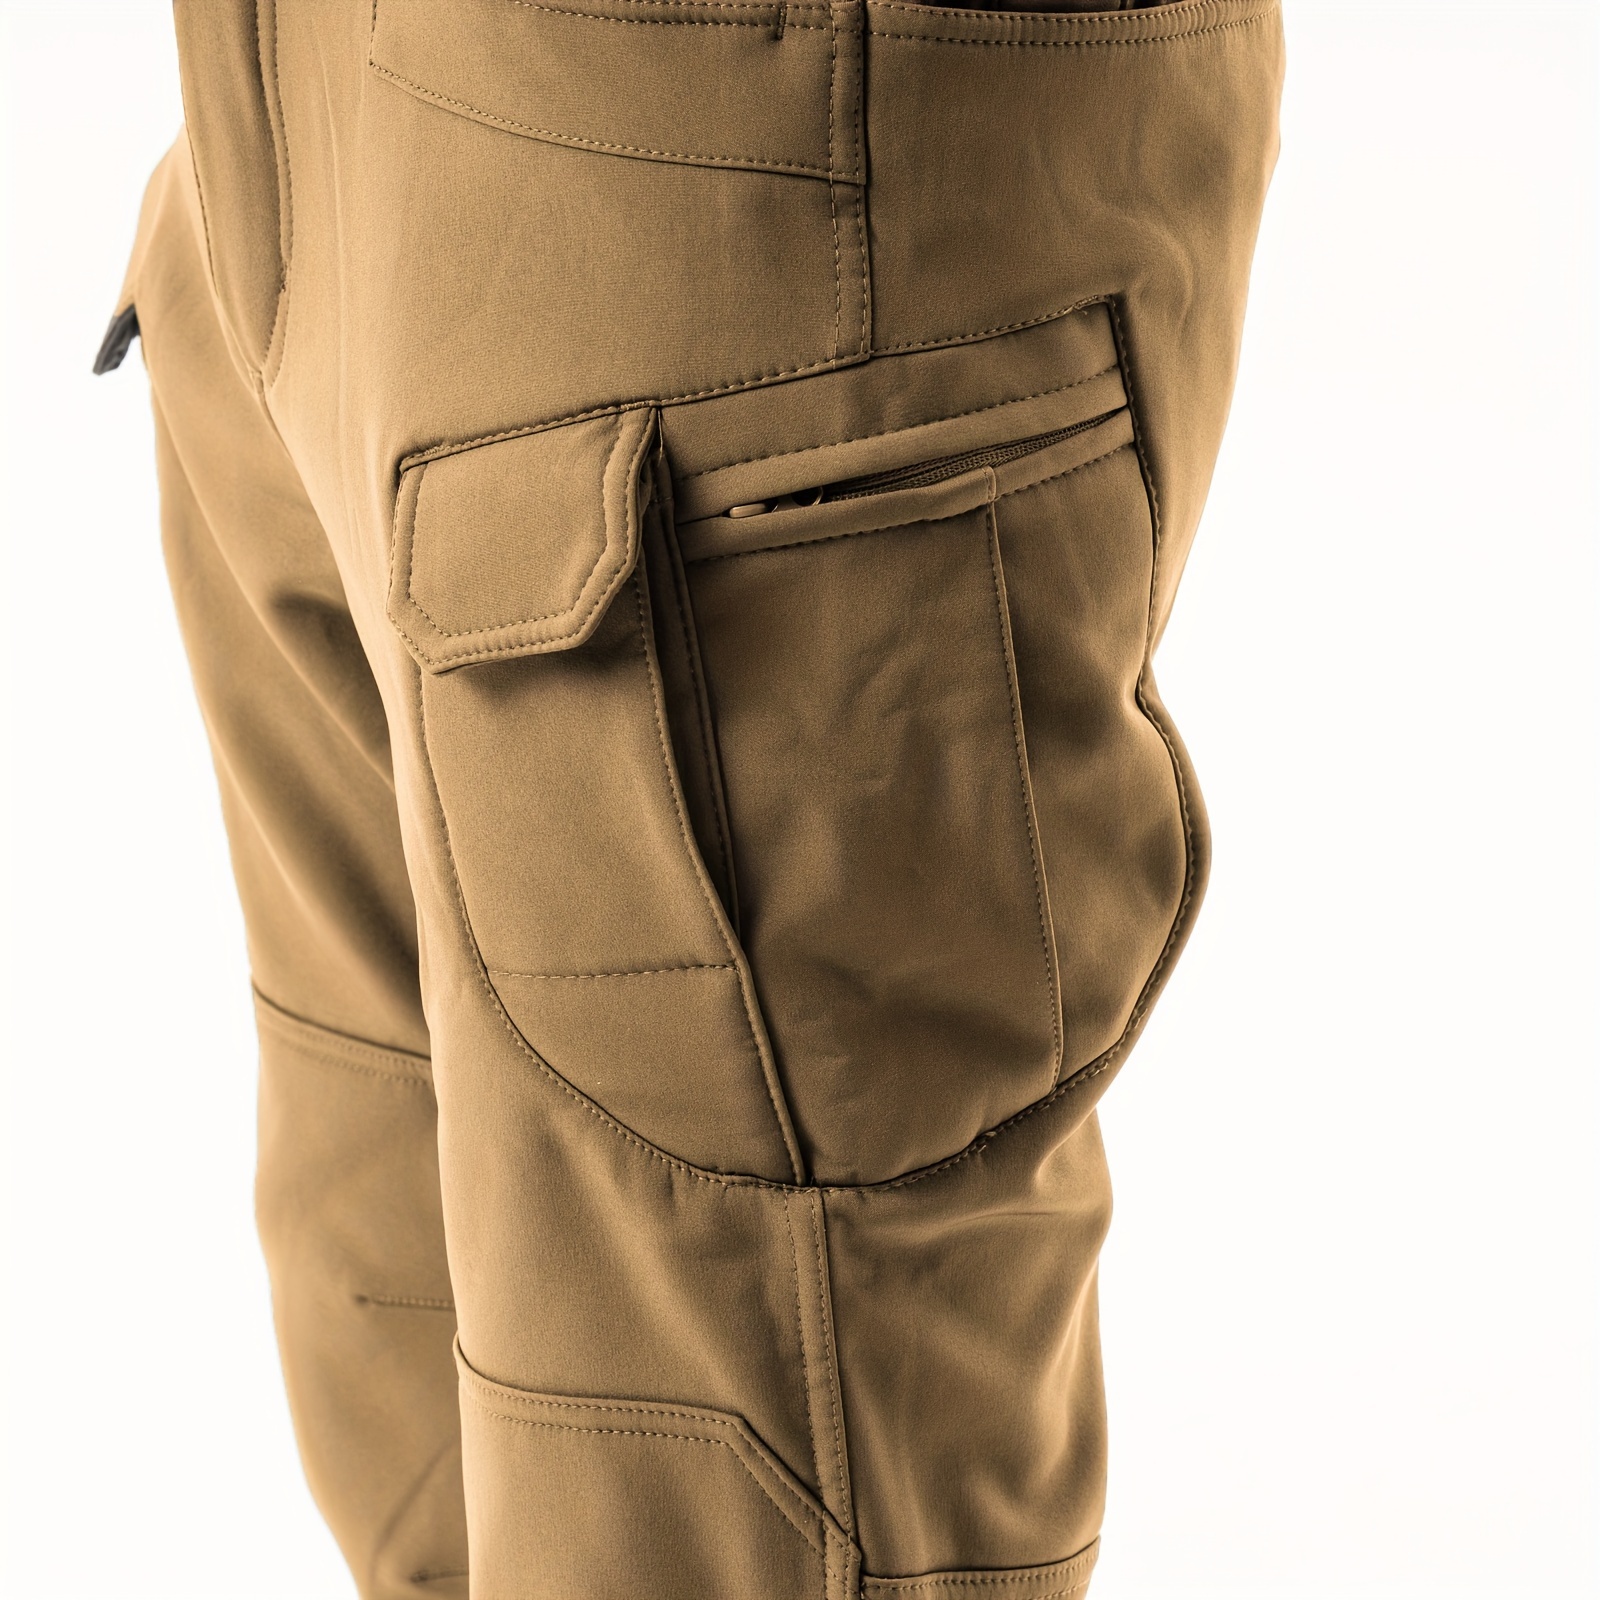 Safety trousers winter, men